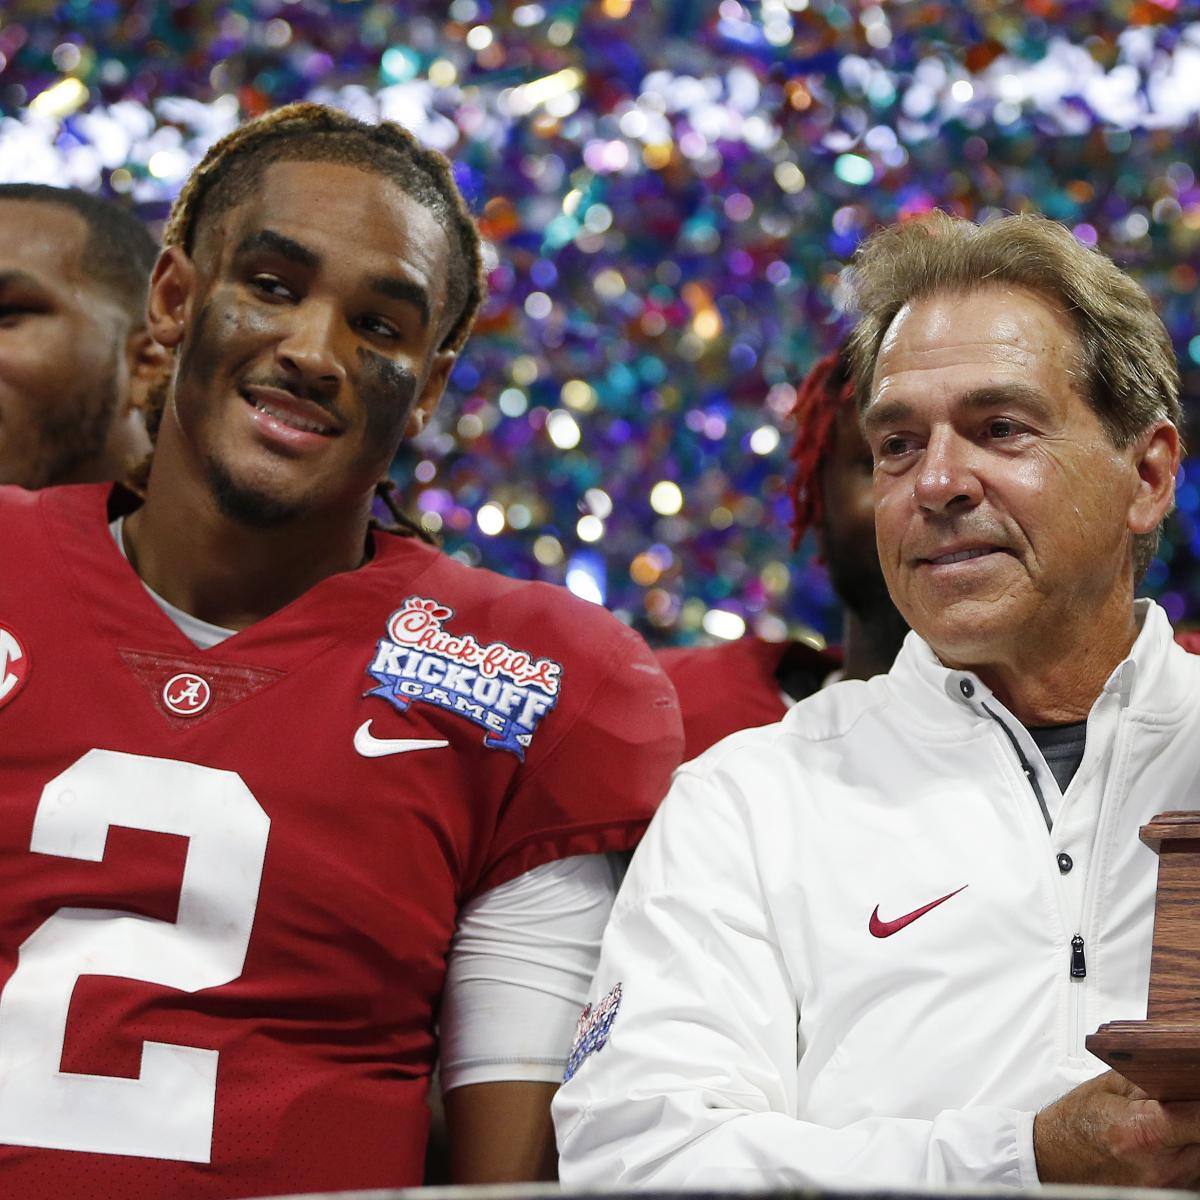 Philadelphia is going to fall in love with Jalen Hurts per Nick Saban